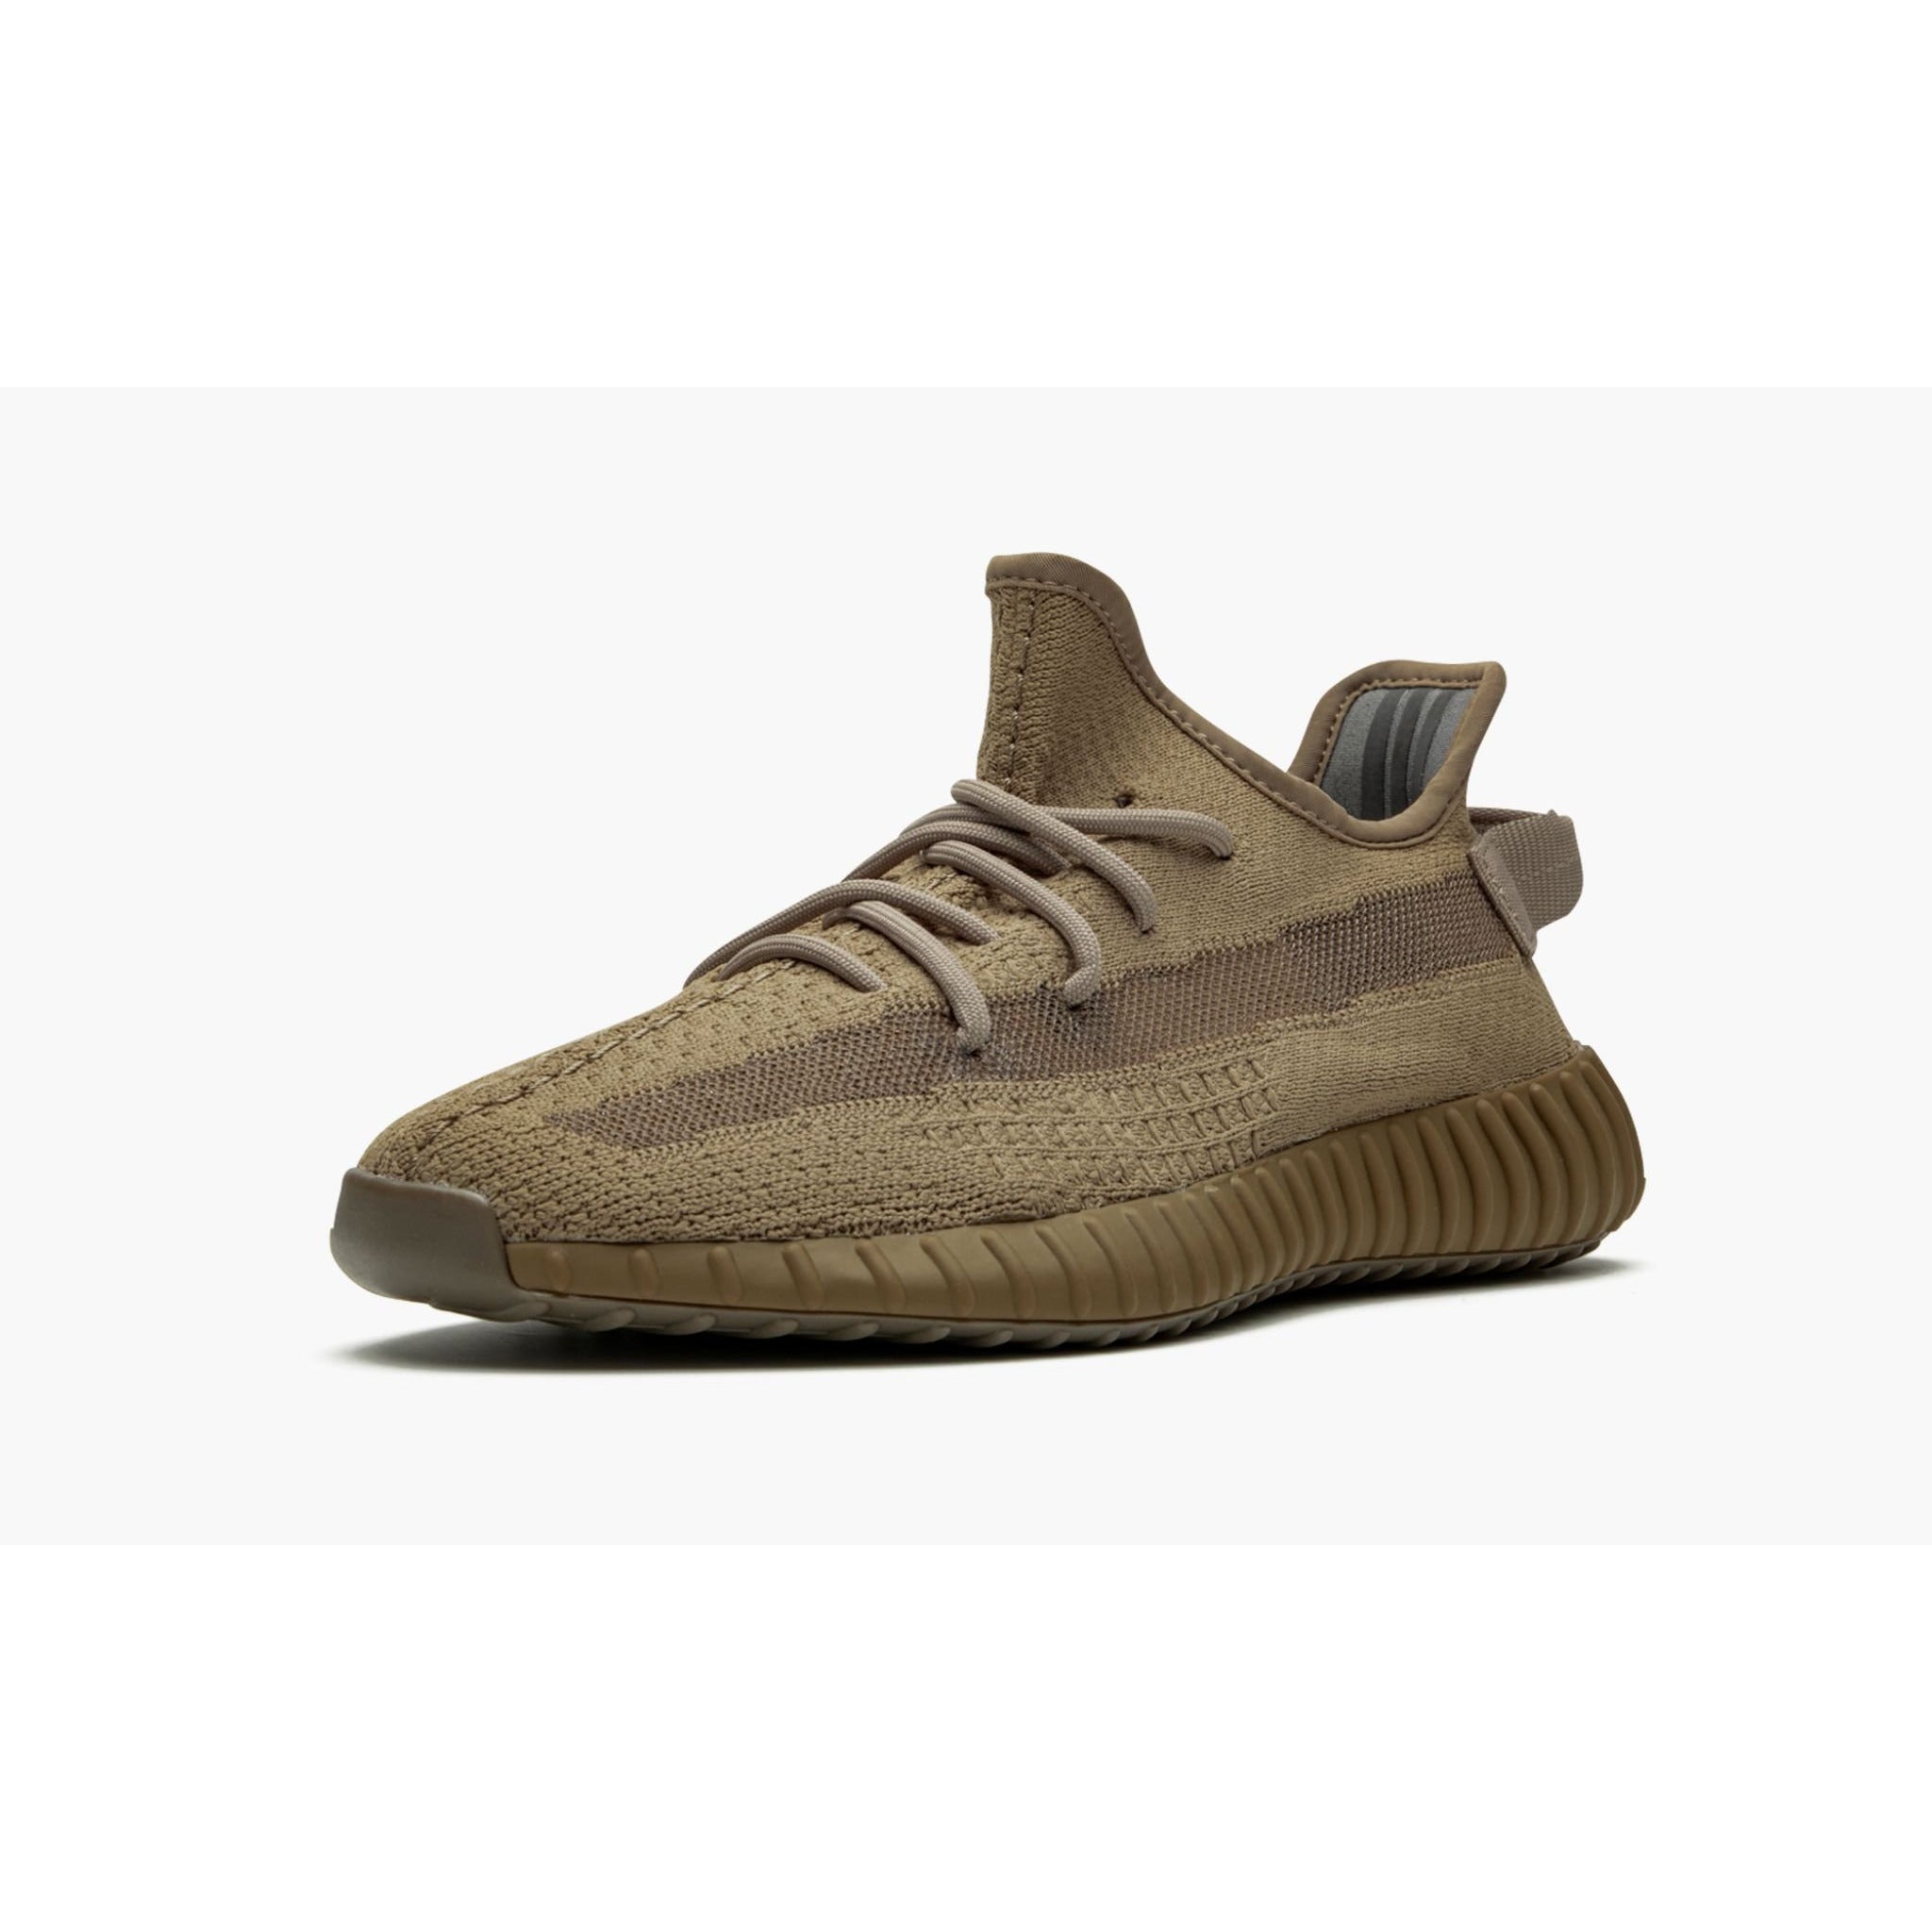 YEEZY BOOST 350 V2 "EARTH" - Manore Store